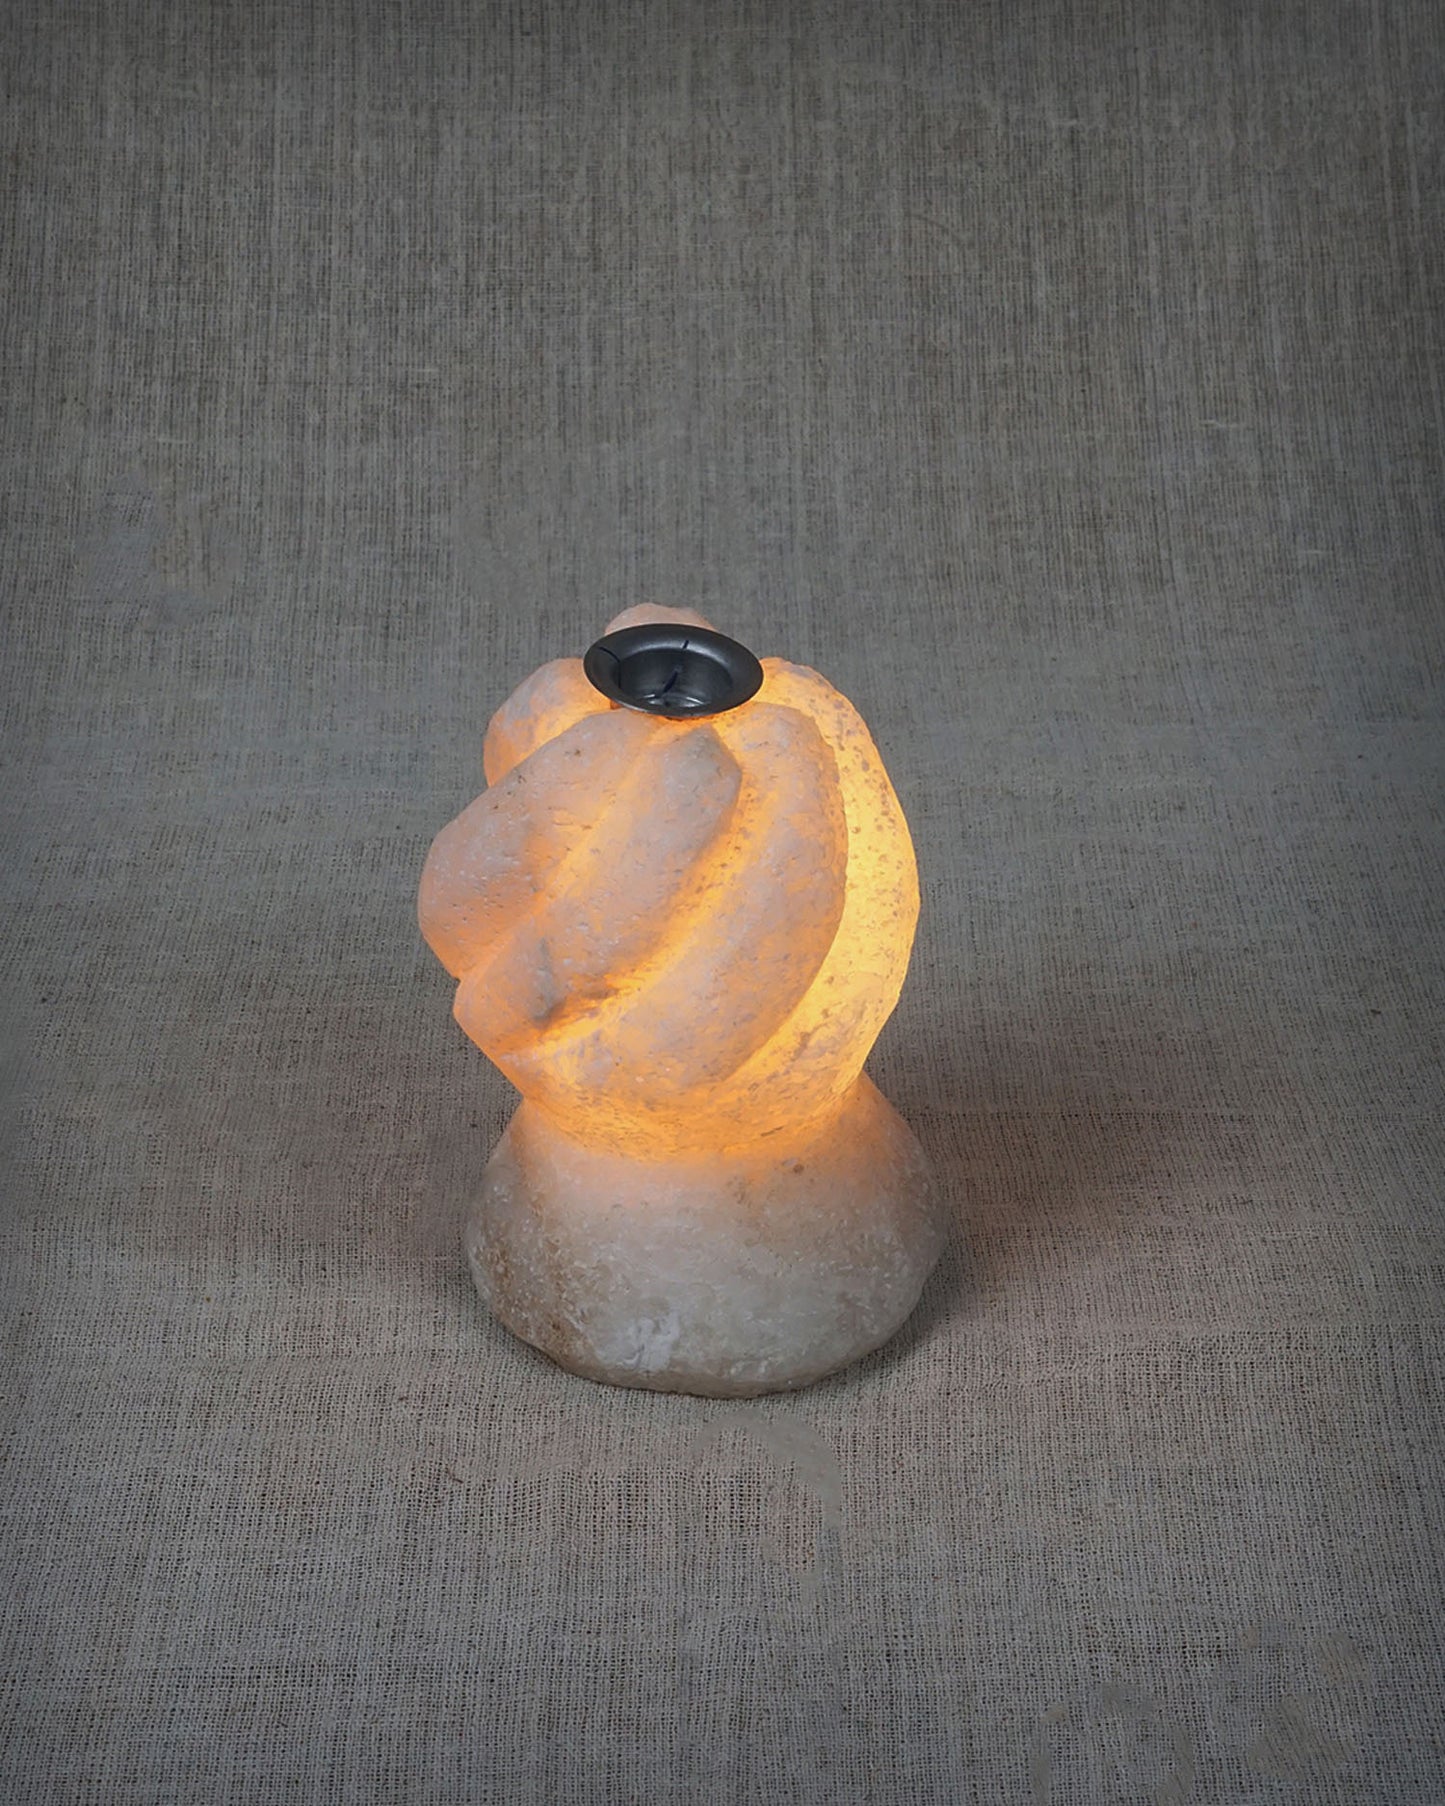 Spiral Oil Infused Rock Salt Lamps with Base.